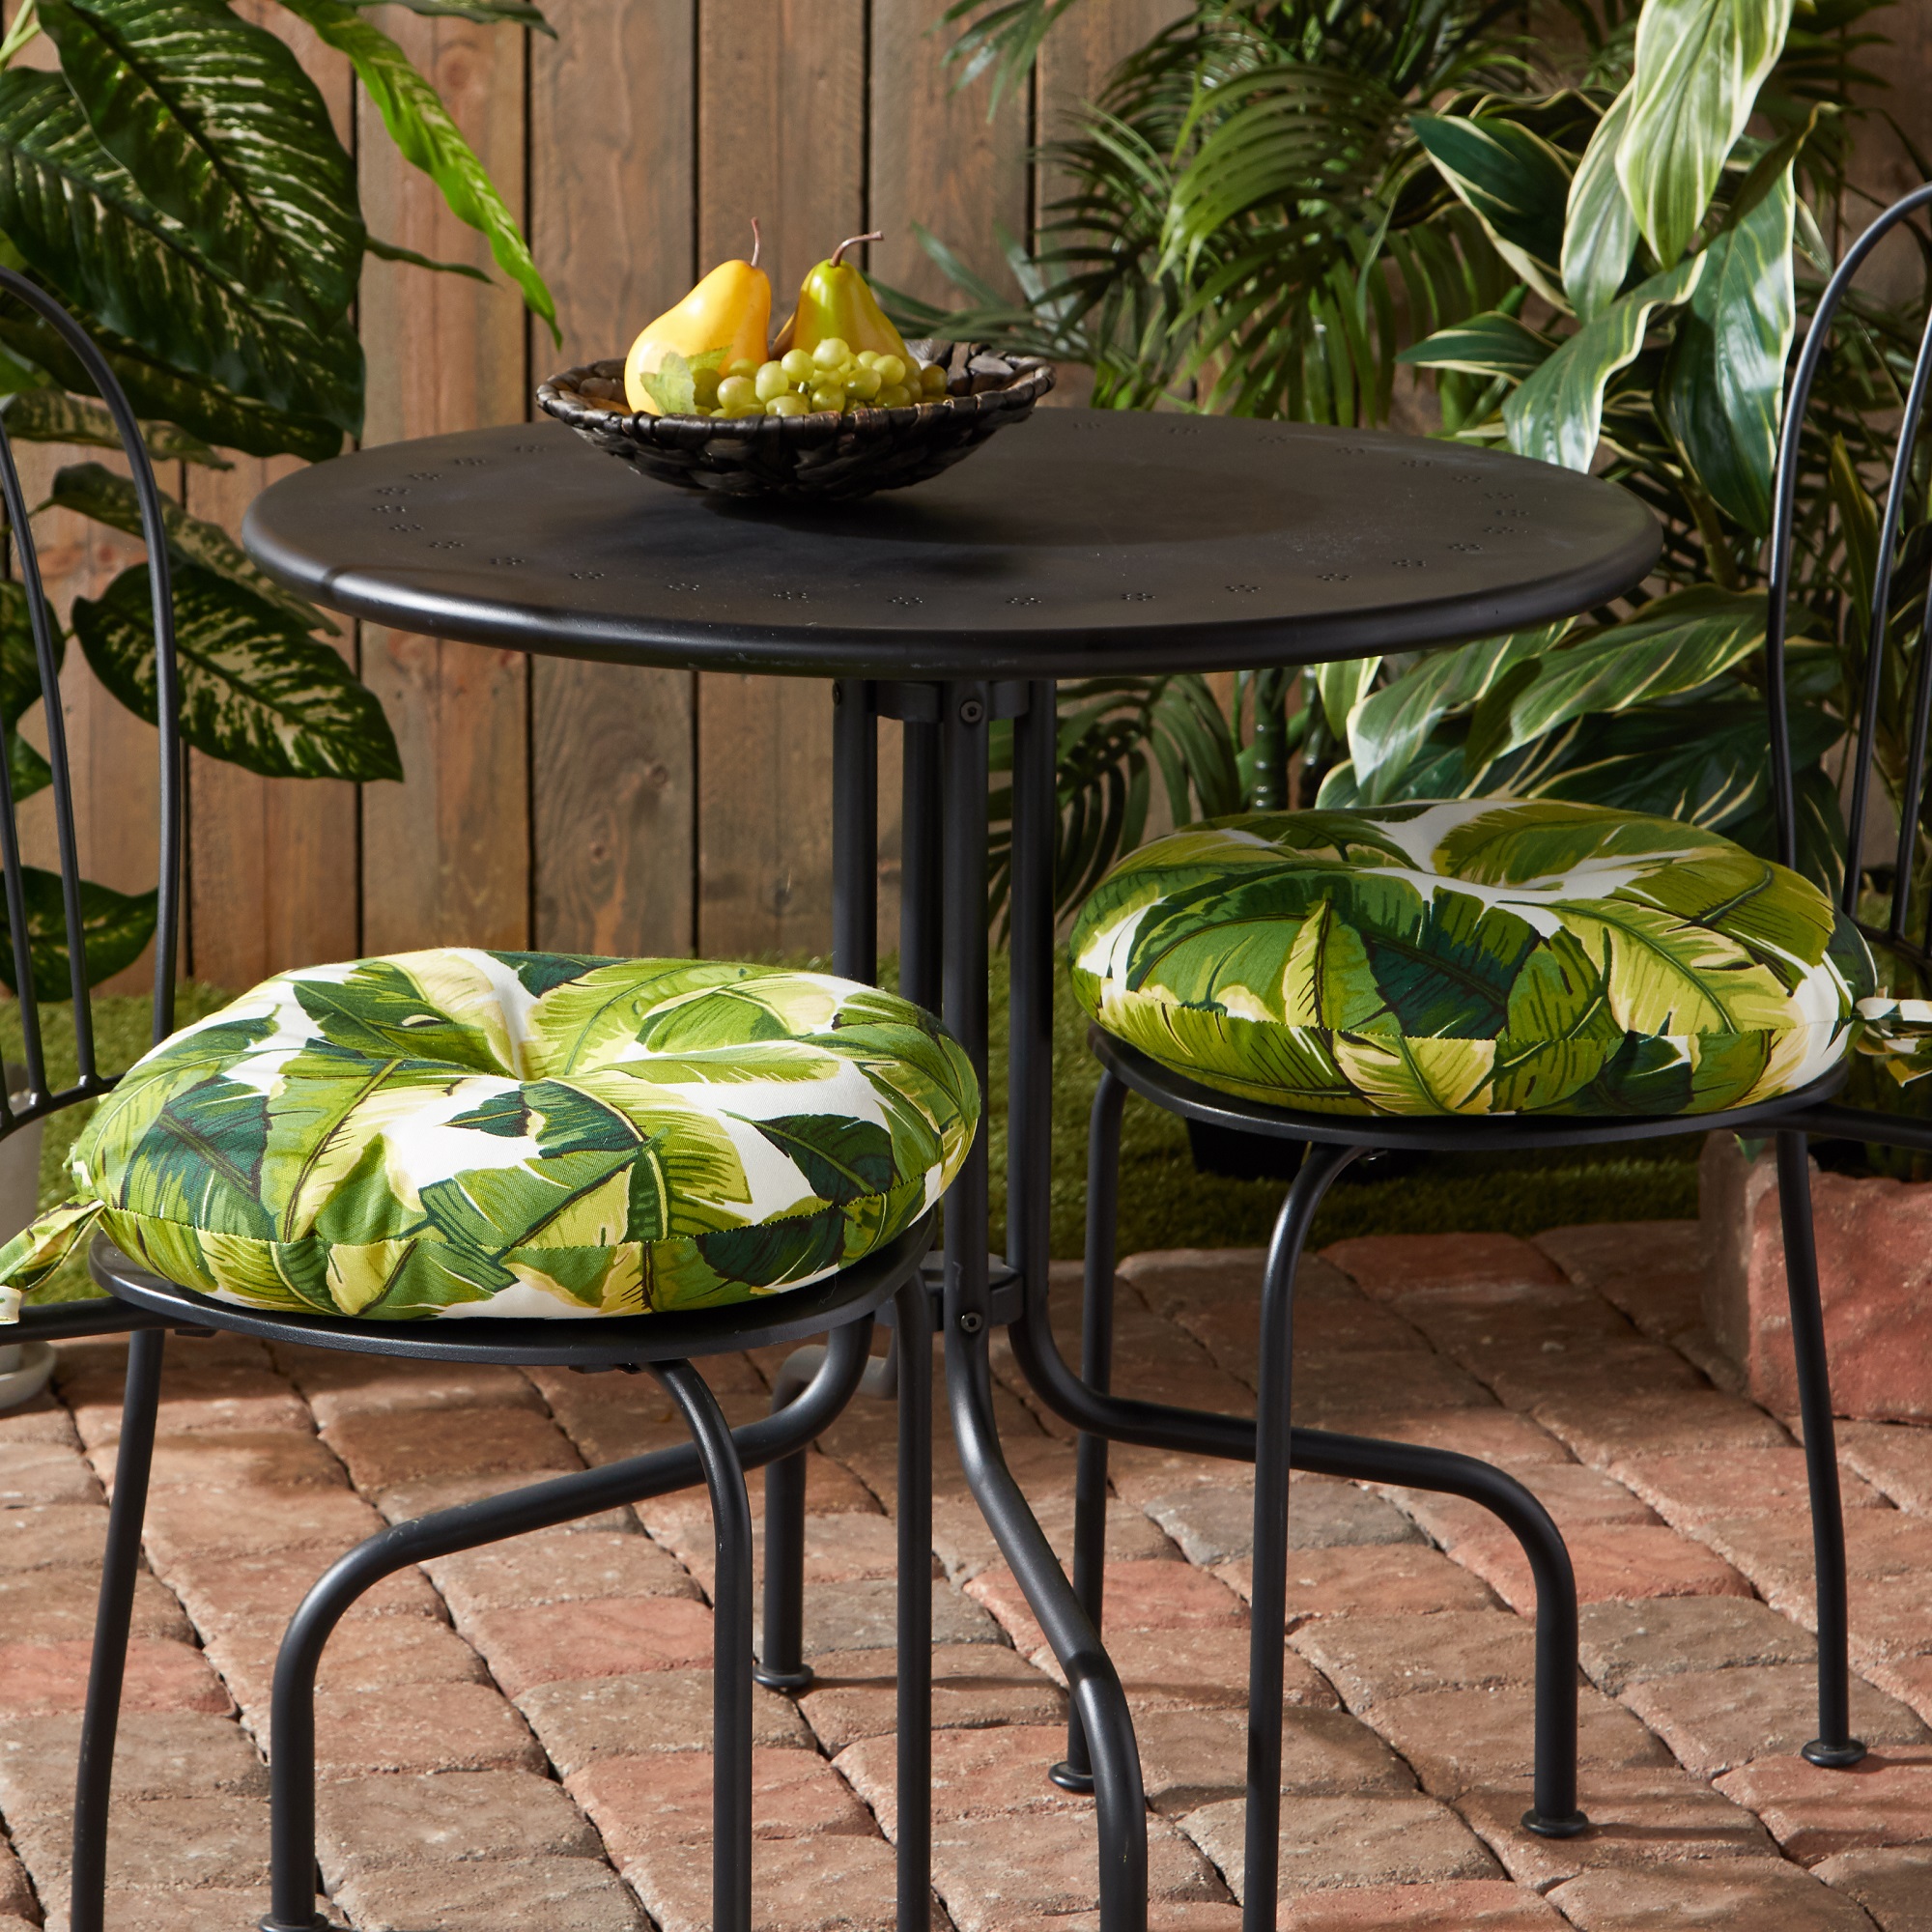 Greendale Home Fashions Palm Leaves White 15 in. Round Outdoor Reversible Bistro Seat Cushion (Set of 2) - image 3 of 7